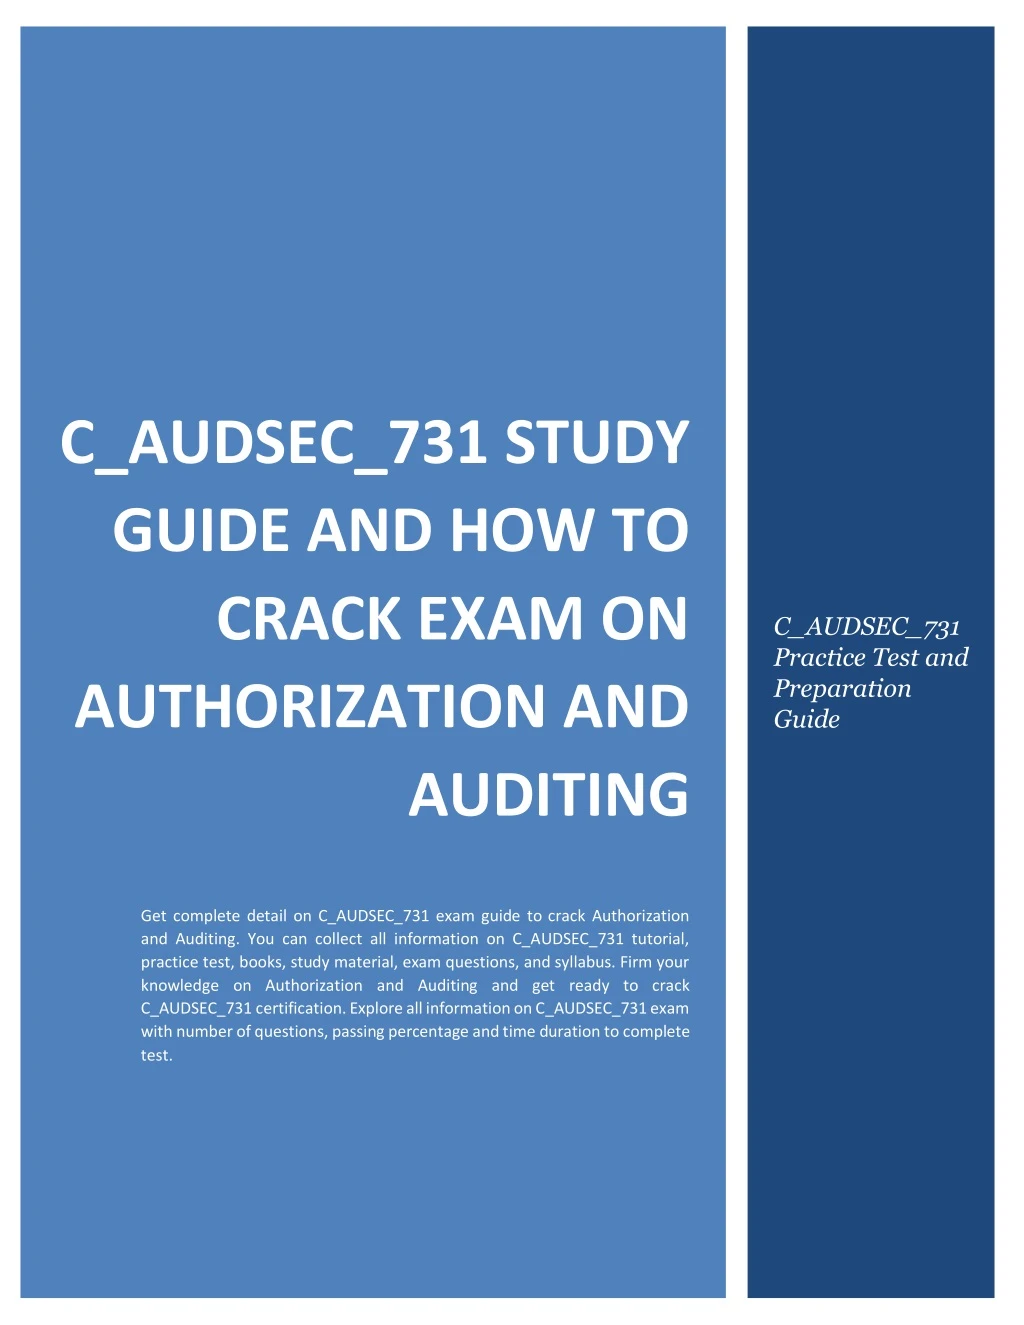 c audsec 731 study guide and how to crack exam